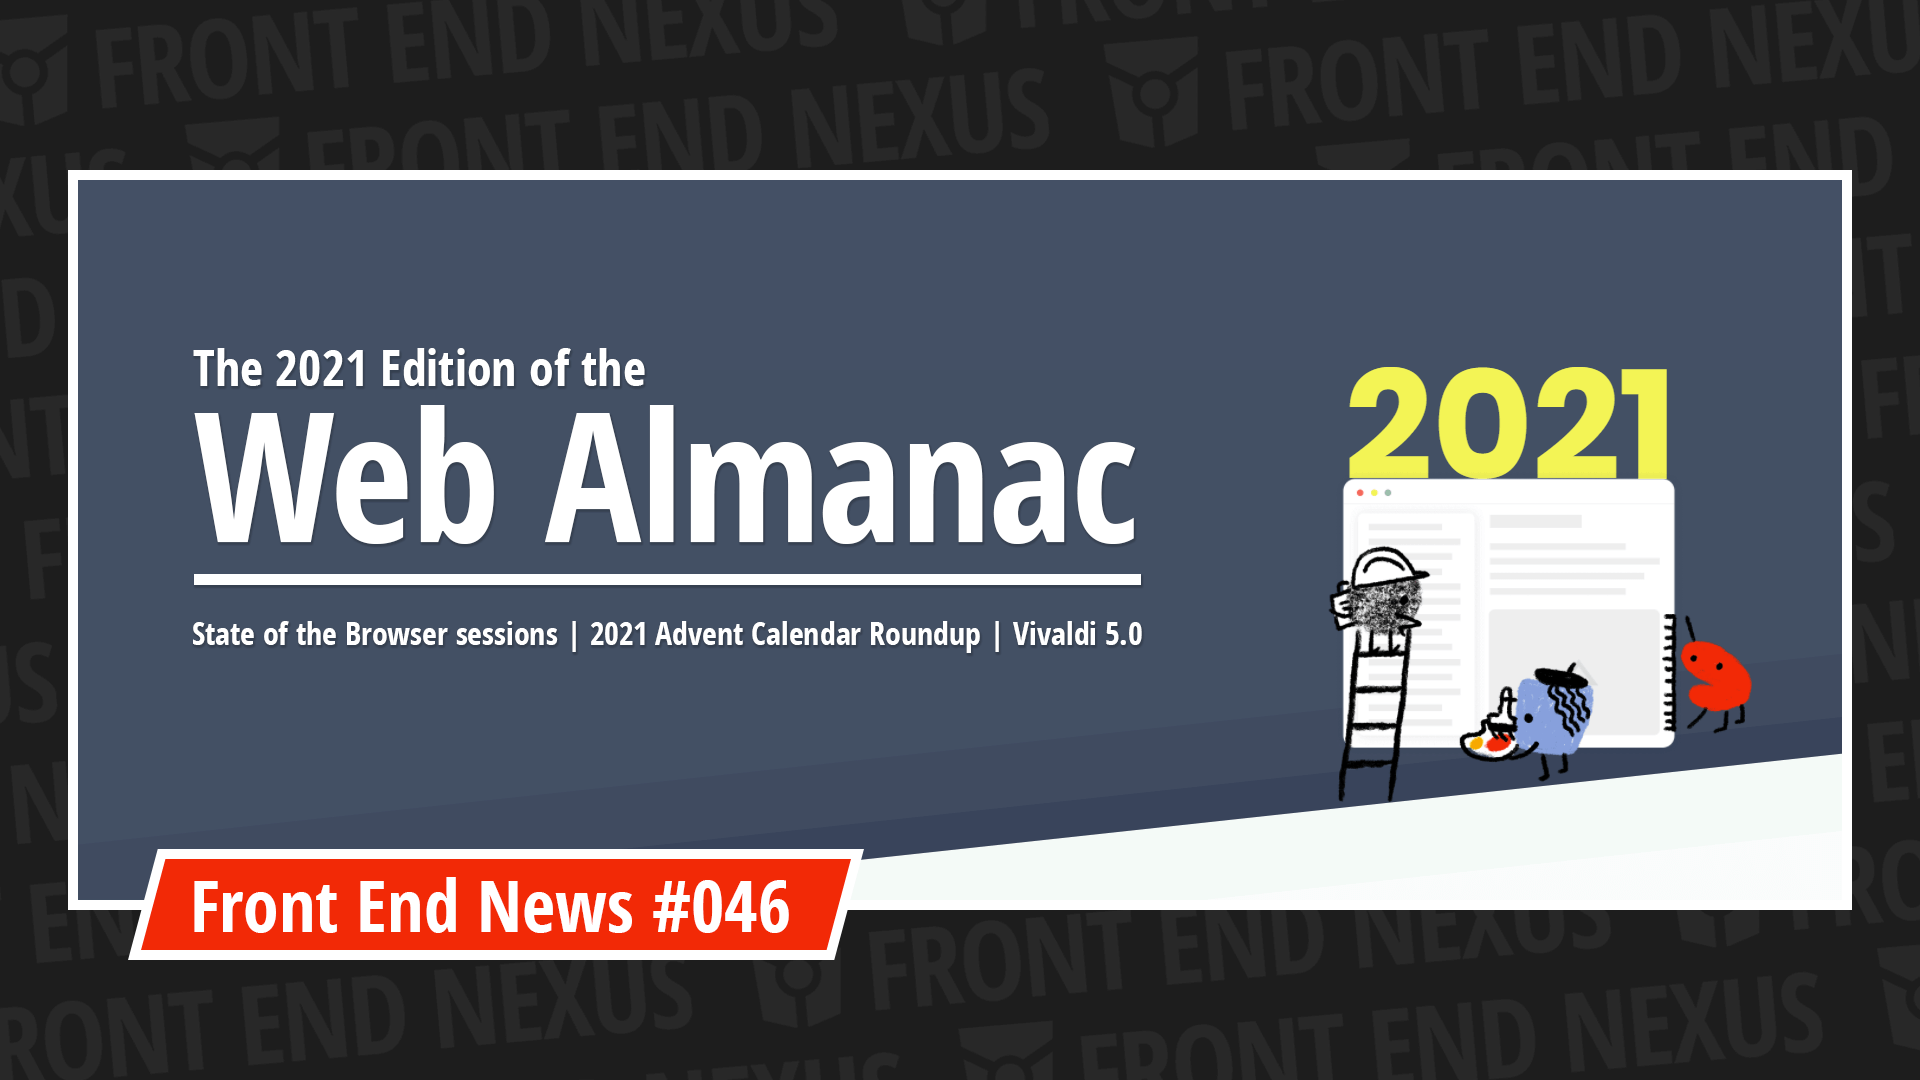 The 2021 Web Almanac, State of the Browser sessions, 2021 Advent Calendar Roundup, Vivaldi 5.0 | Front End News #046